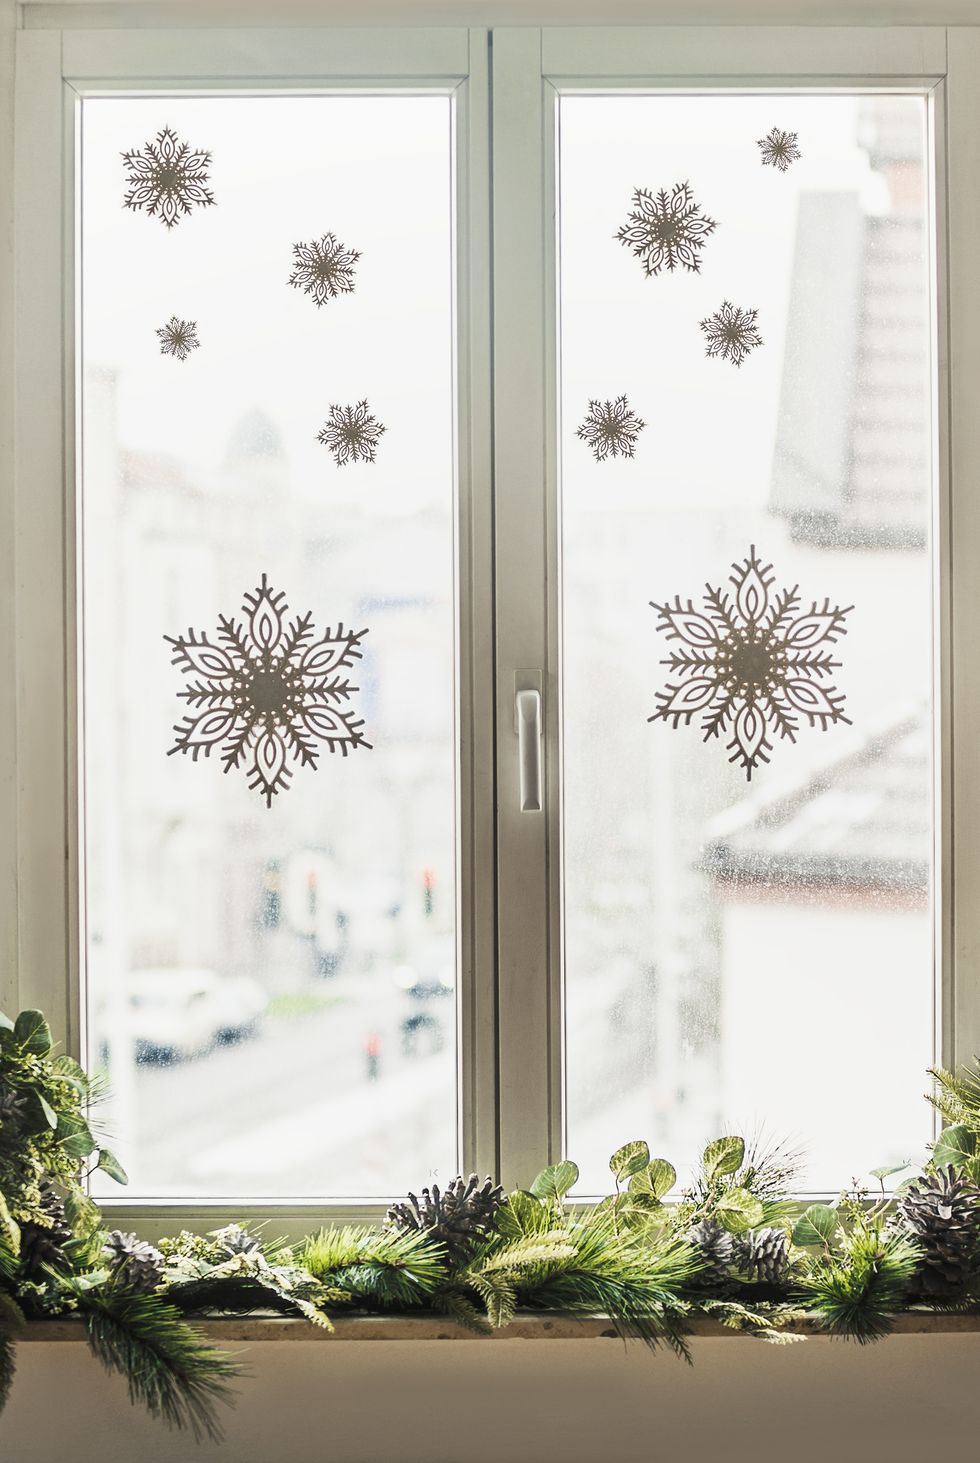 Window Clings for the Winter Holidays - Lia Griffith